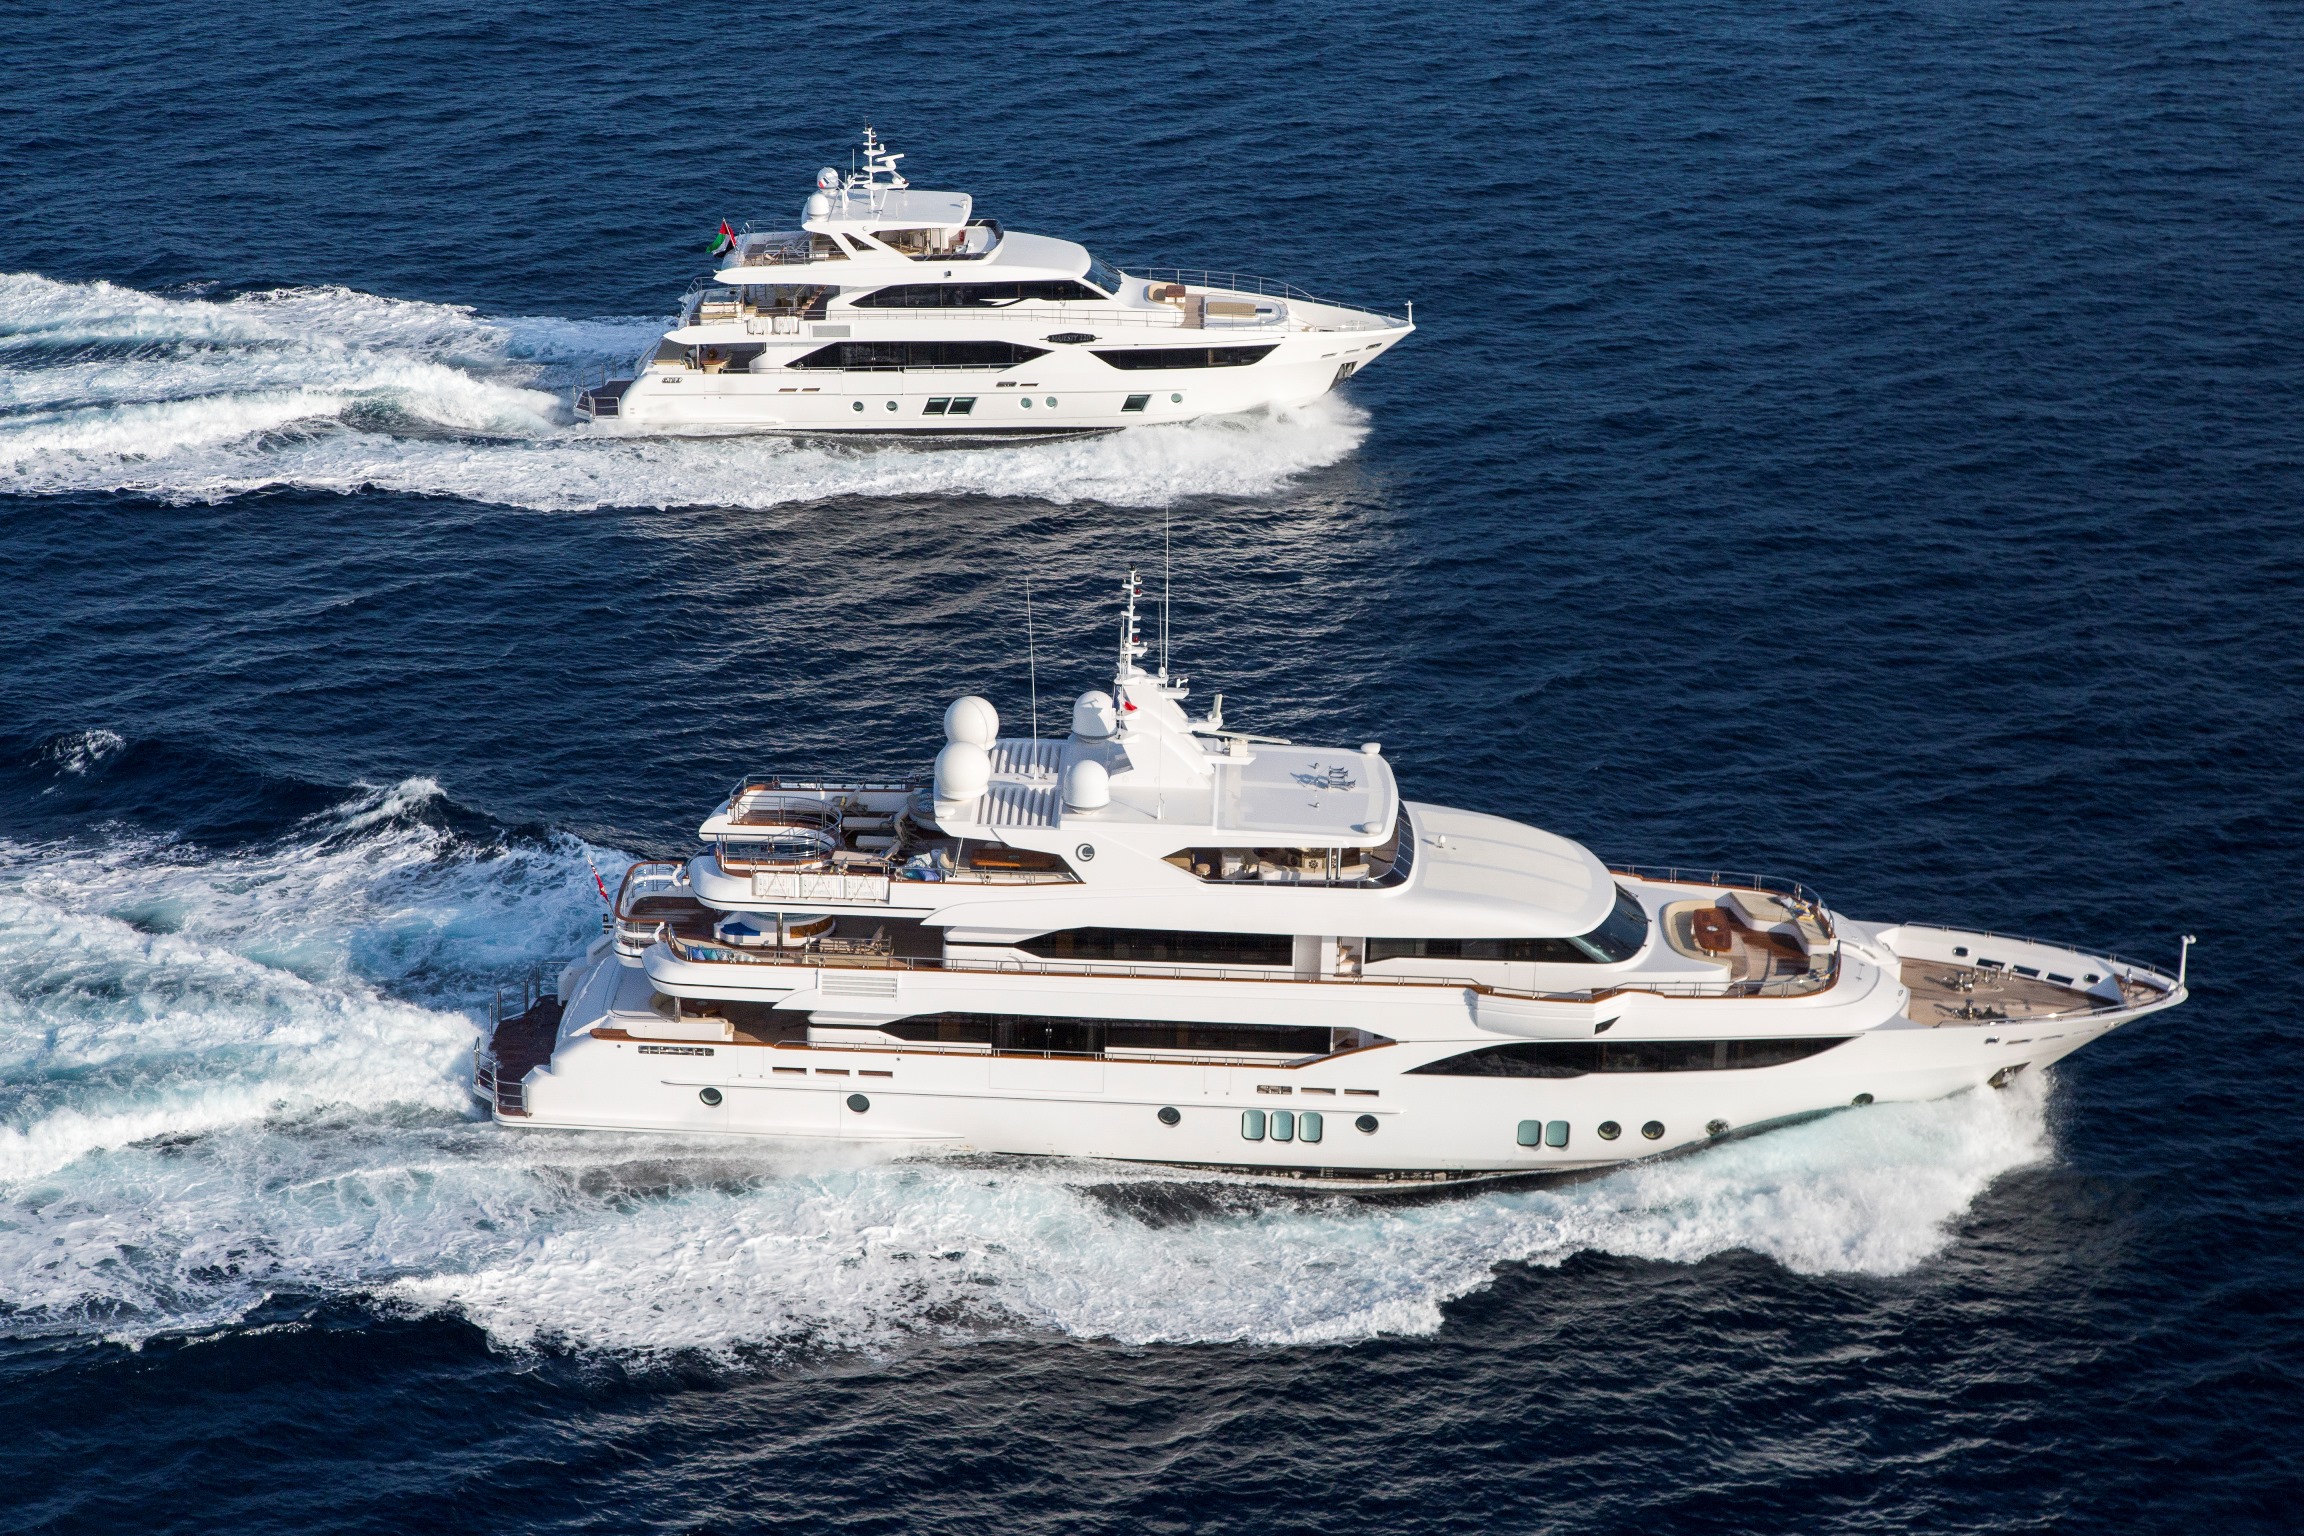 Majesty 155 and Majesty 110 in Cannes, France 006.jpg